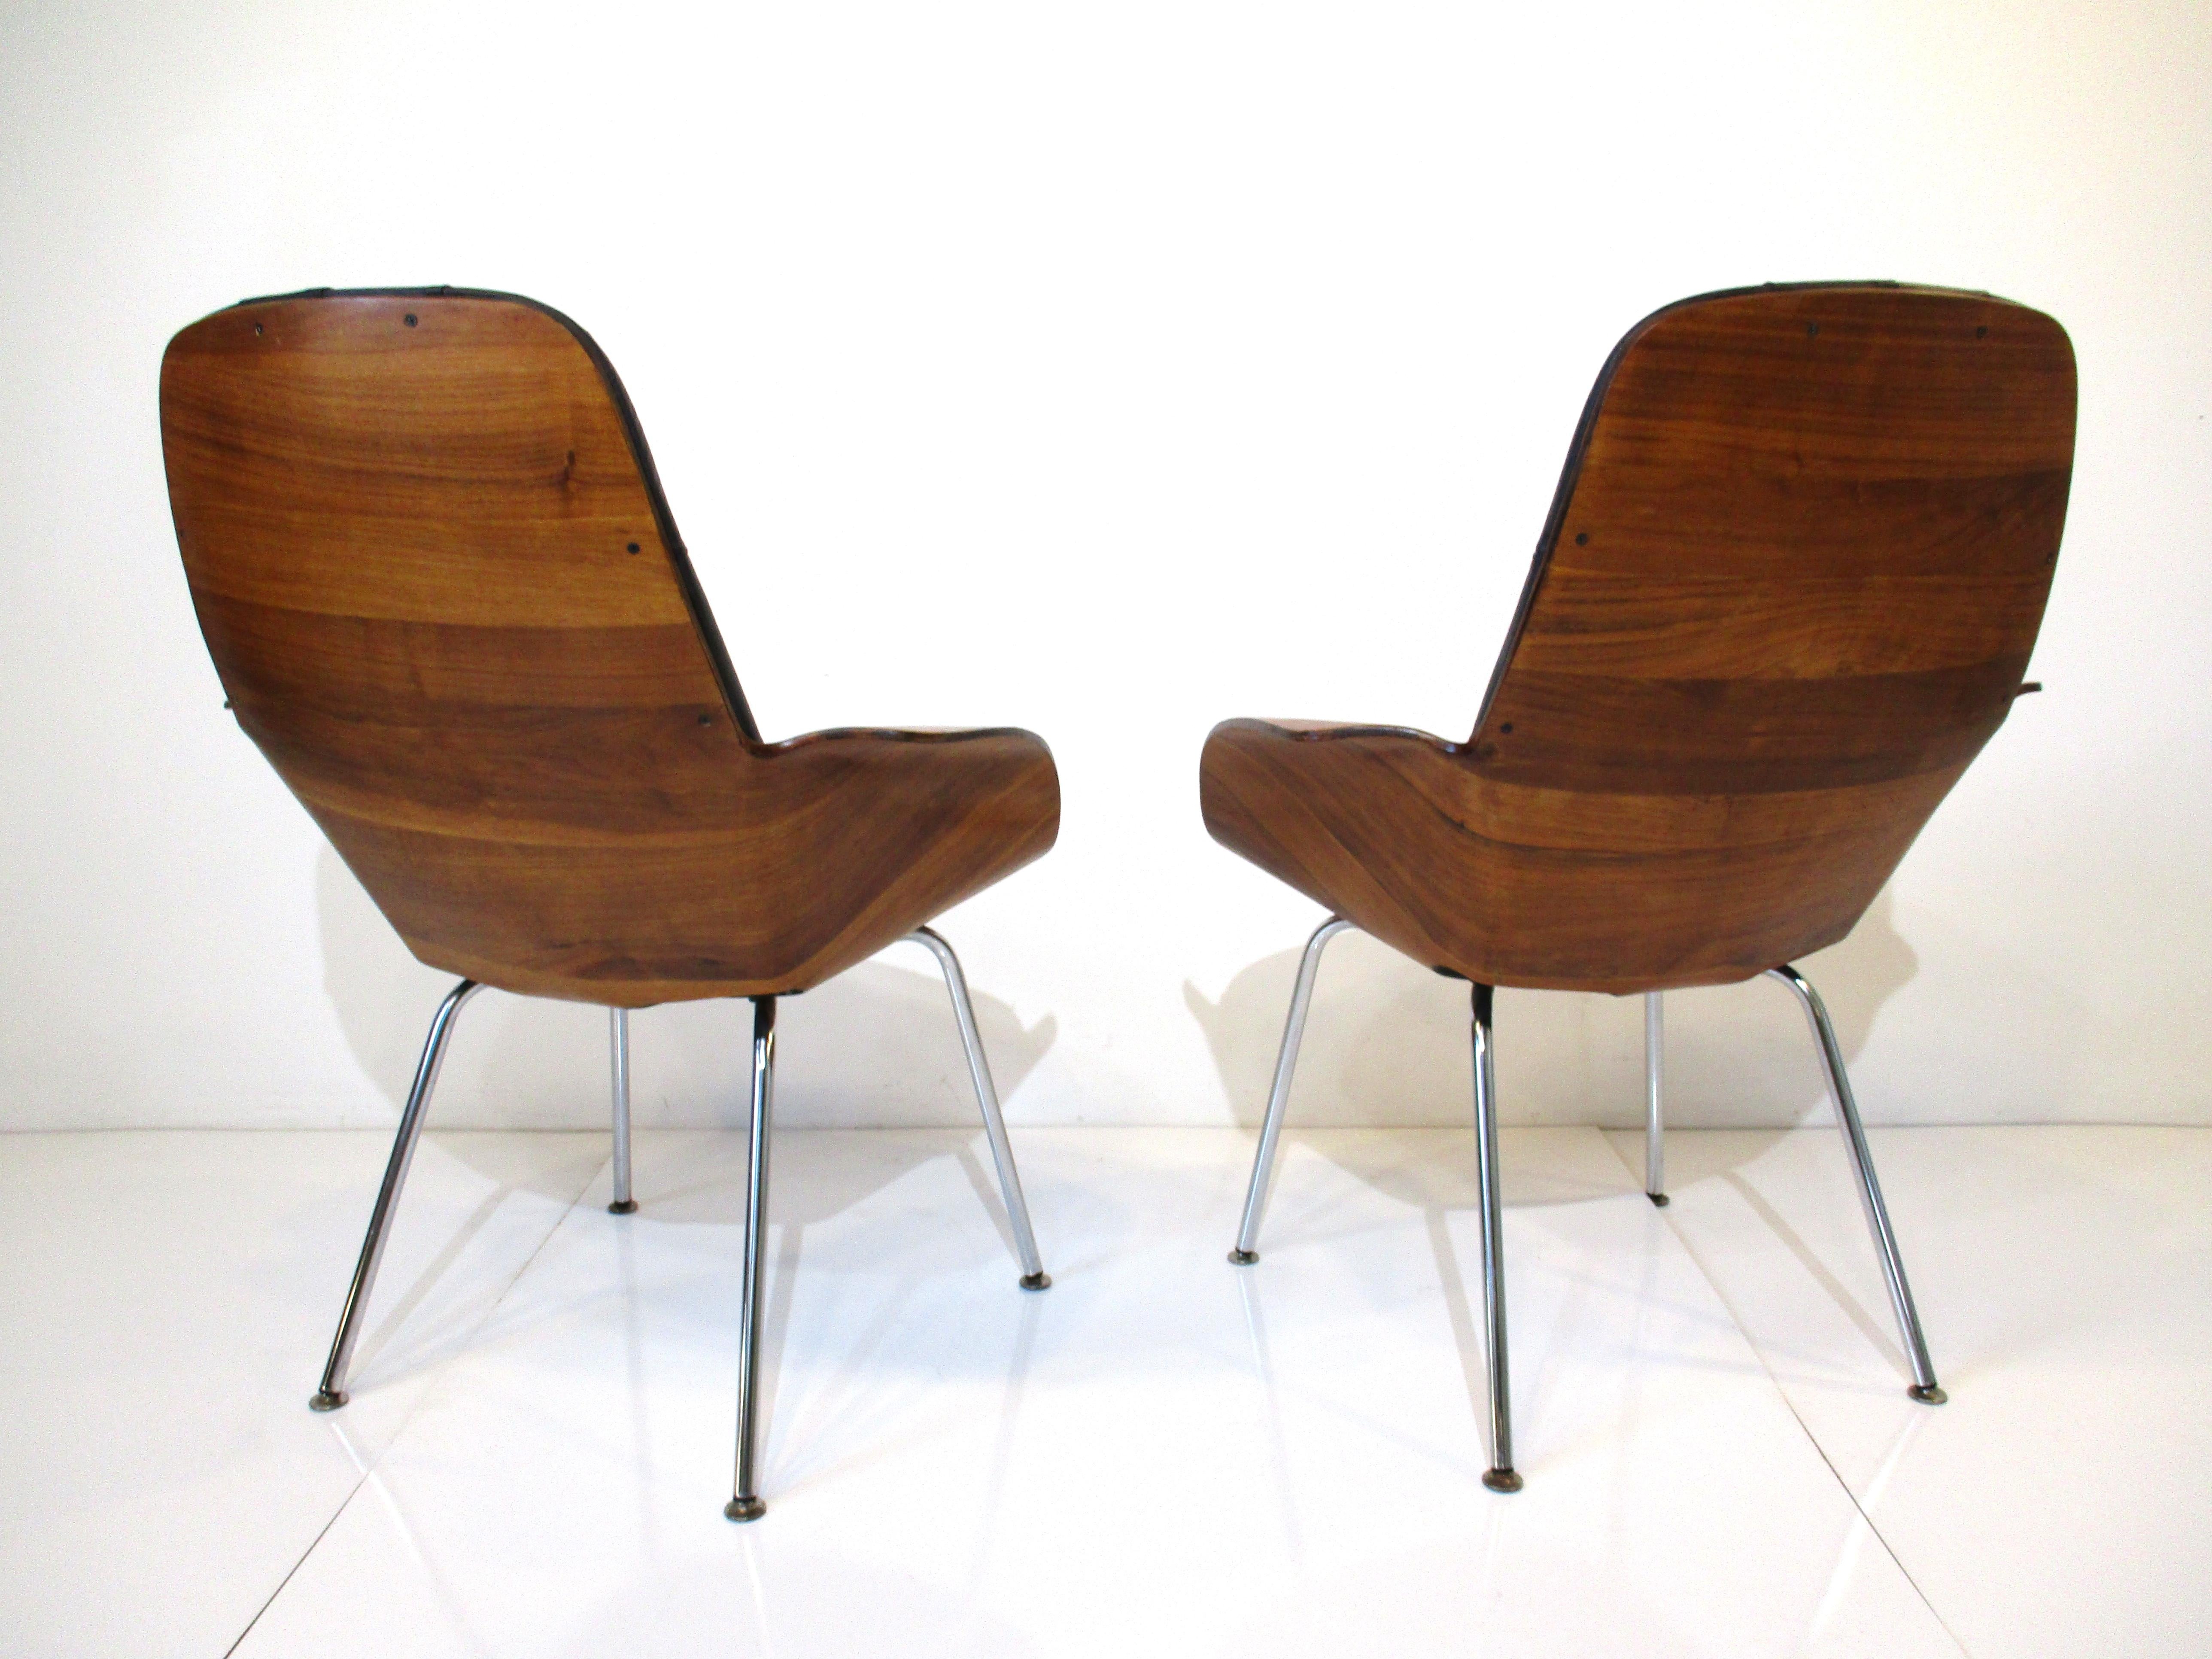 A pair of bent sculptural walnut bodied chairs with winged arms having satin black button tufted seat bottoms and backs. Sitting on chromed legs making these chairs very sturdy as they are comfortable all combined to give them a rich and